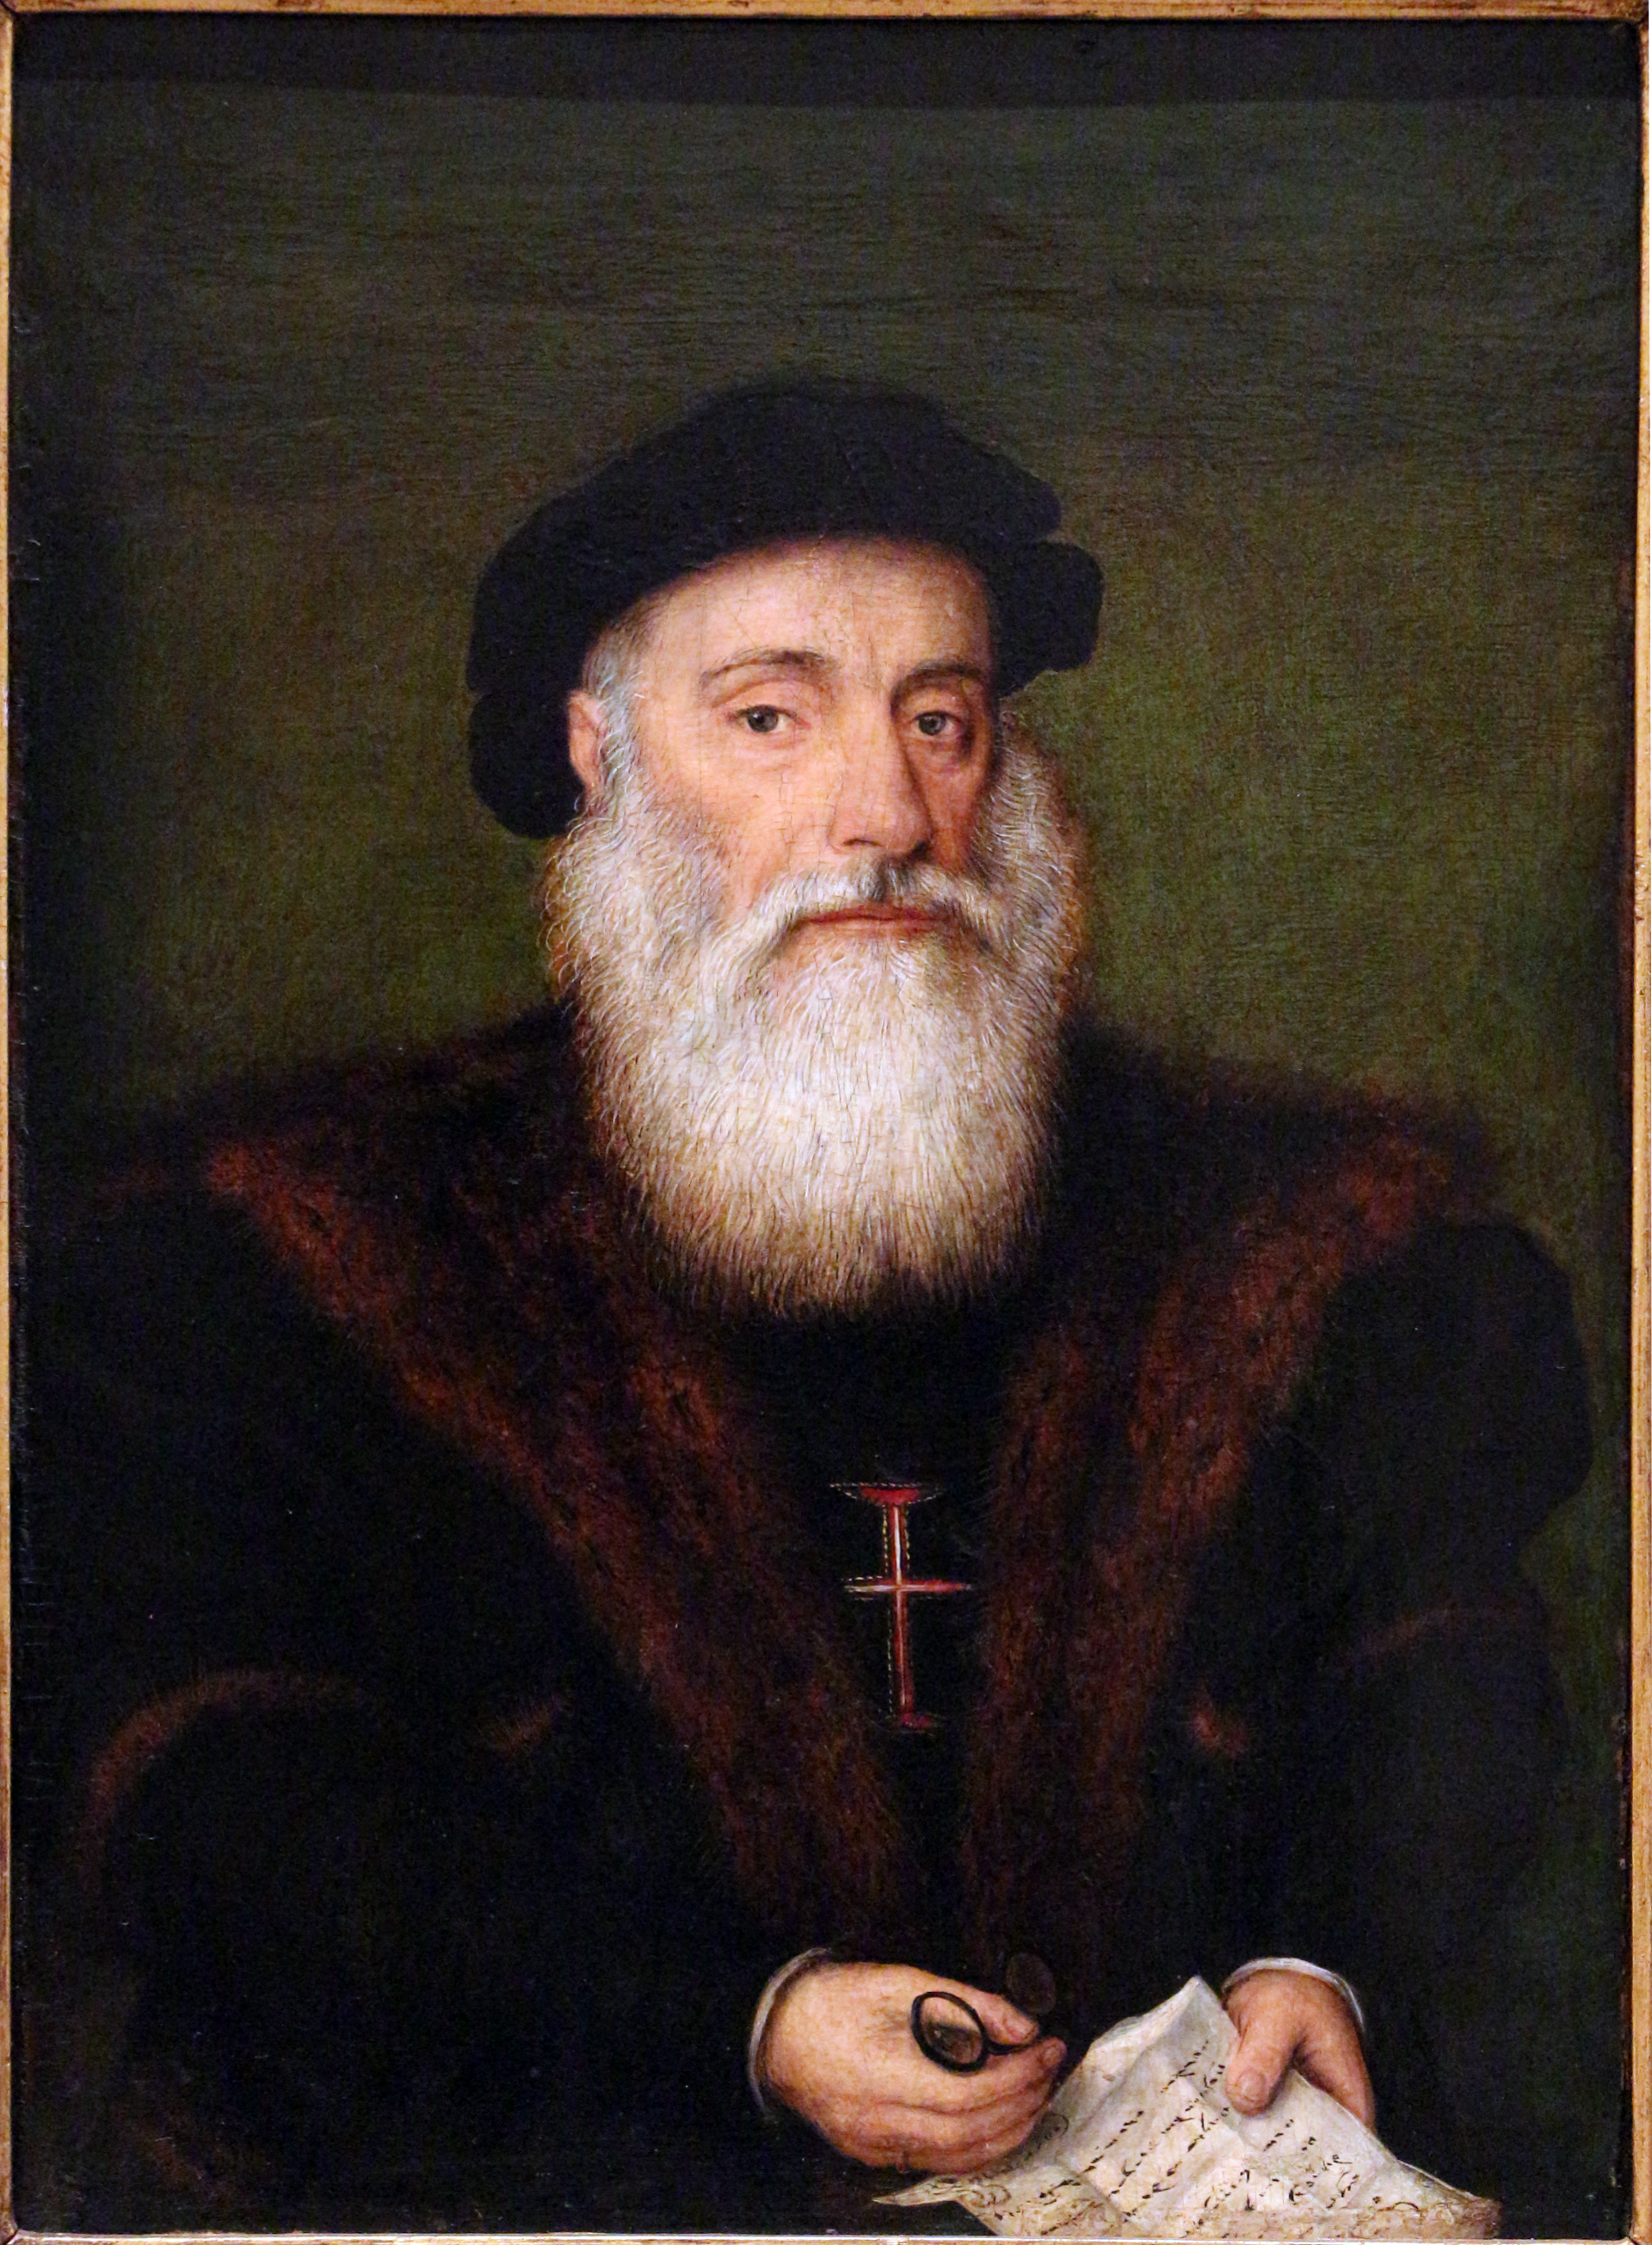 <p>A Portuguese explorer who sailed farther east in Diaz landed in India in 1498. He claimed the territory for Portugal in India. The ports in India were crucial in expanding Portugal&apos;s trade in the Indian Ocean. LO 2) Portugal sponsored maritime exploration allowing for the Portuguese to gain ports in South Asia for trading expanding maritime exploration in Portugal.</p>